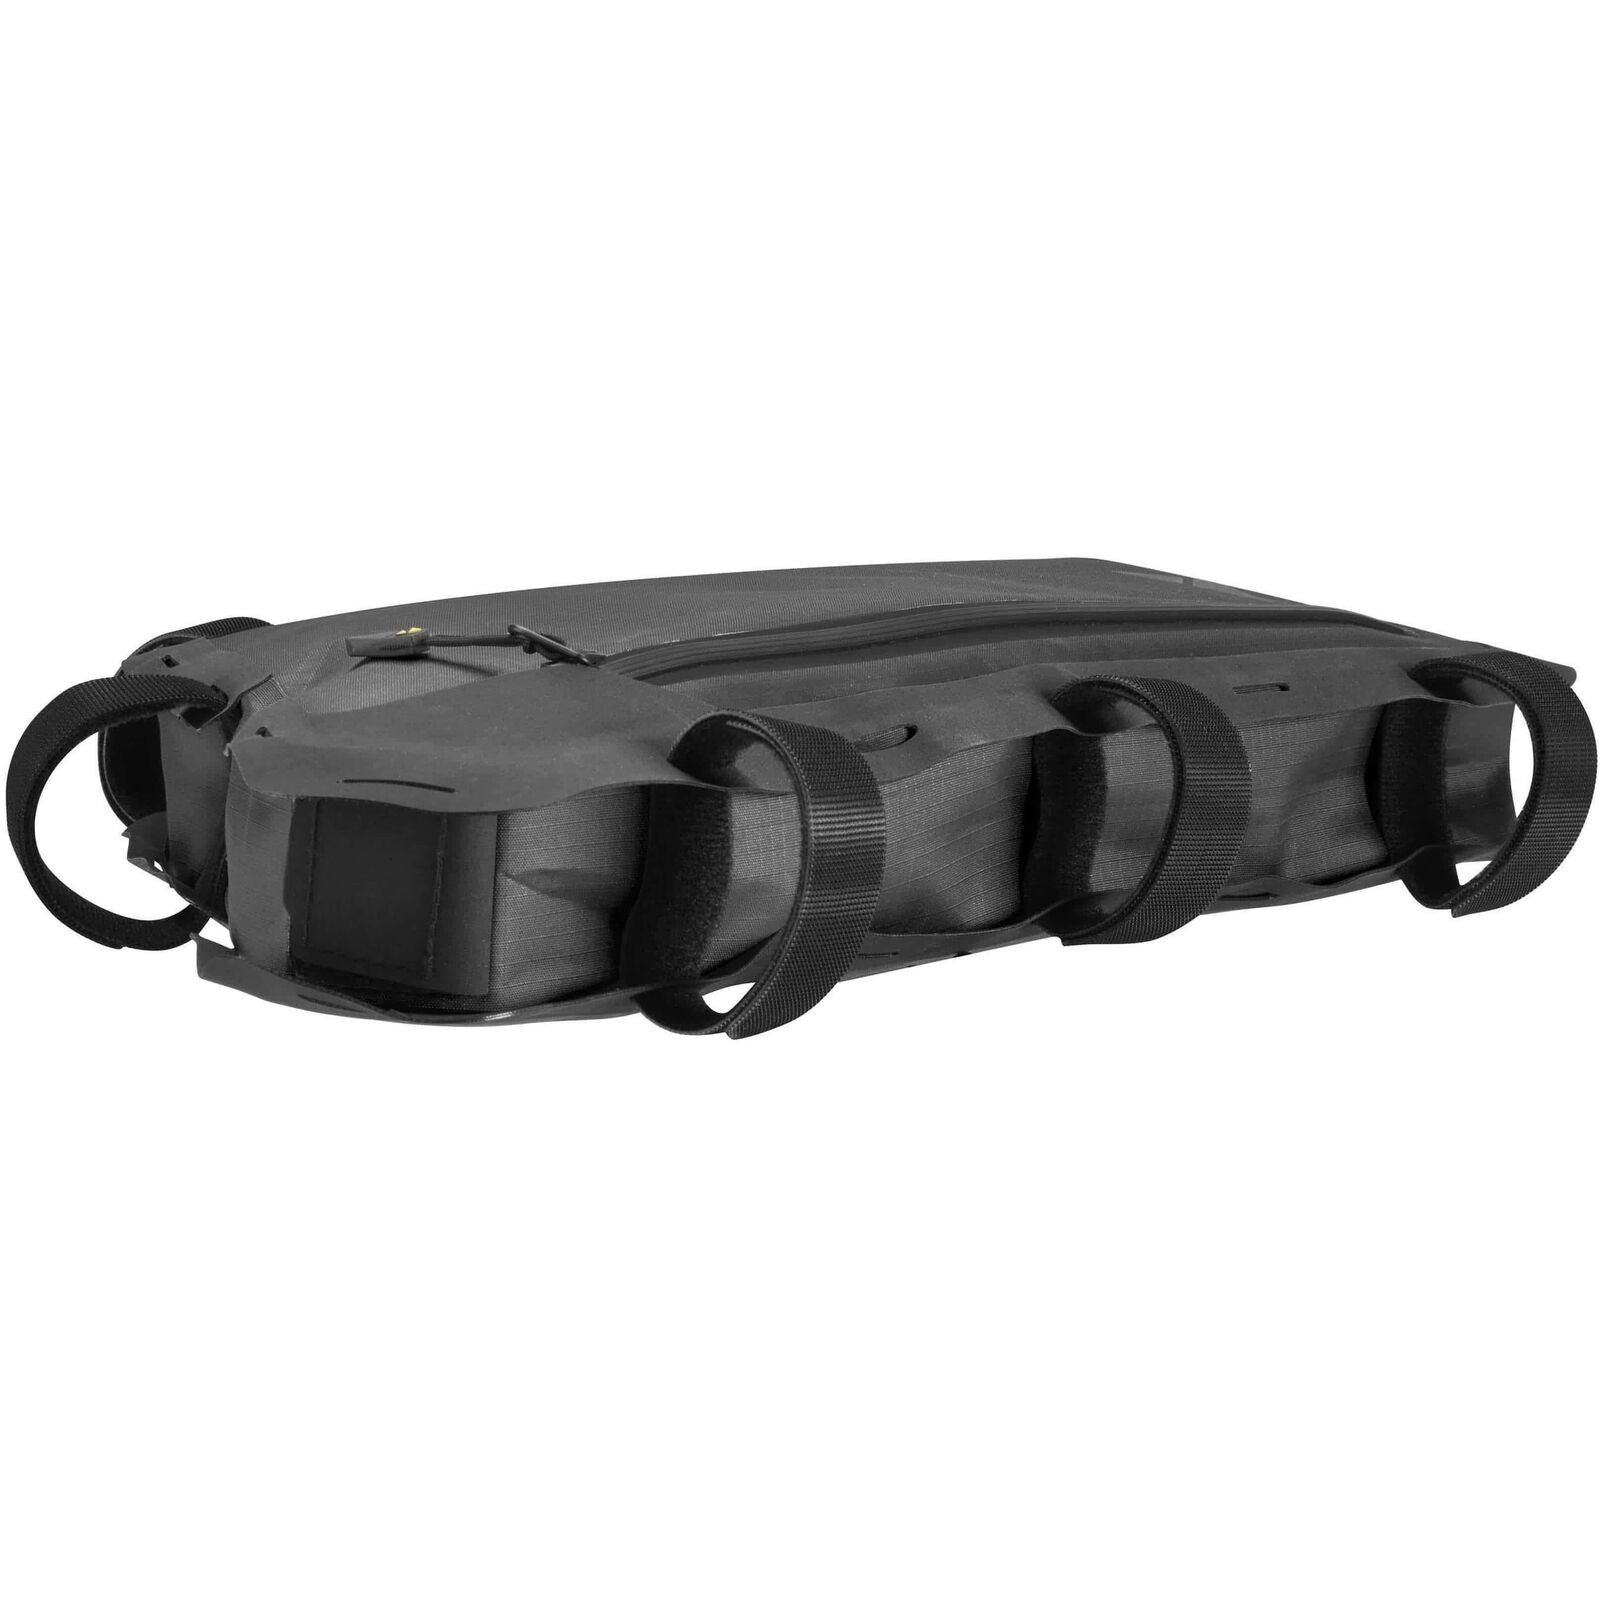 Altura Vortex 2 Waterproof Frame Bag - Grey: A versatile frame bag designed for bikepacking adventures. Waterproof and lightweight, it offers a universal Hook & Loop mounting system for easy installation on any bike. Features include an external zip pocket for quick access to personal items and reflective details for enhanced visibility.